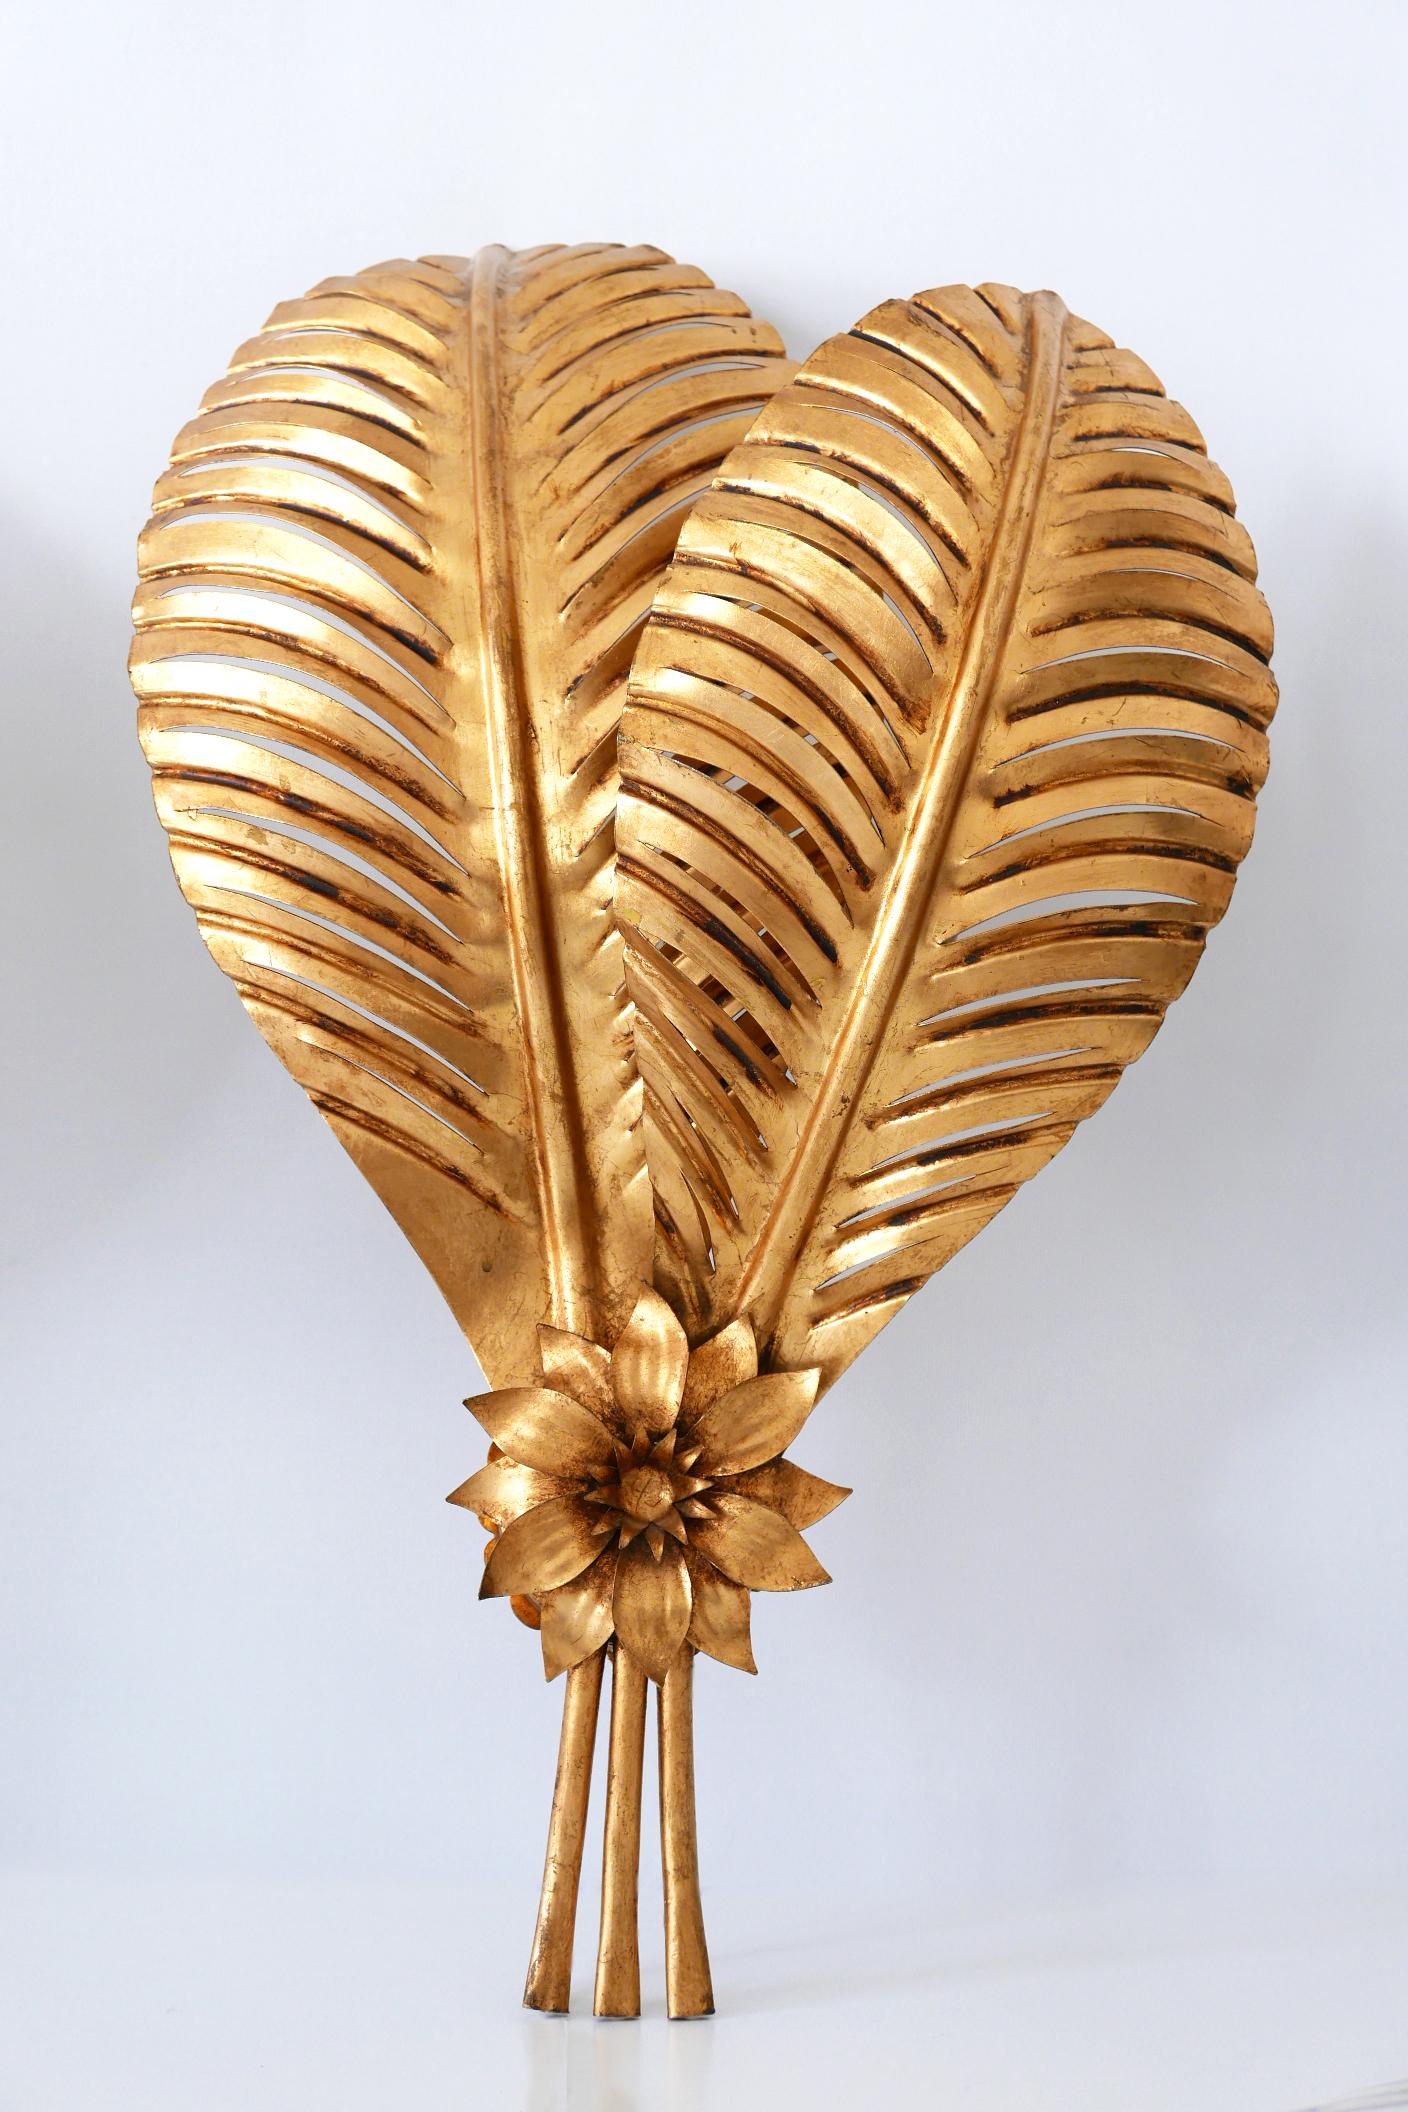 Set of Two Extra Large Gilt Metal Palm Leaf Wall Lamps, Hans Kögl, 1970s Germany For Sale 2